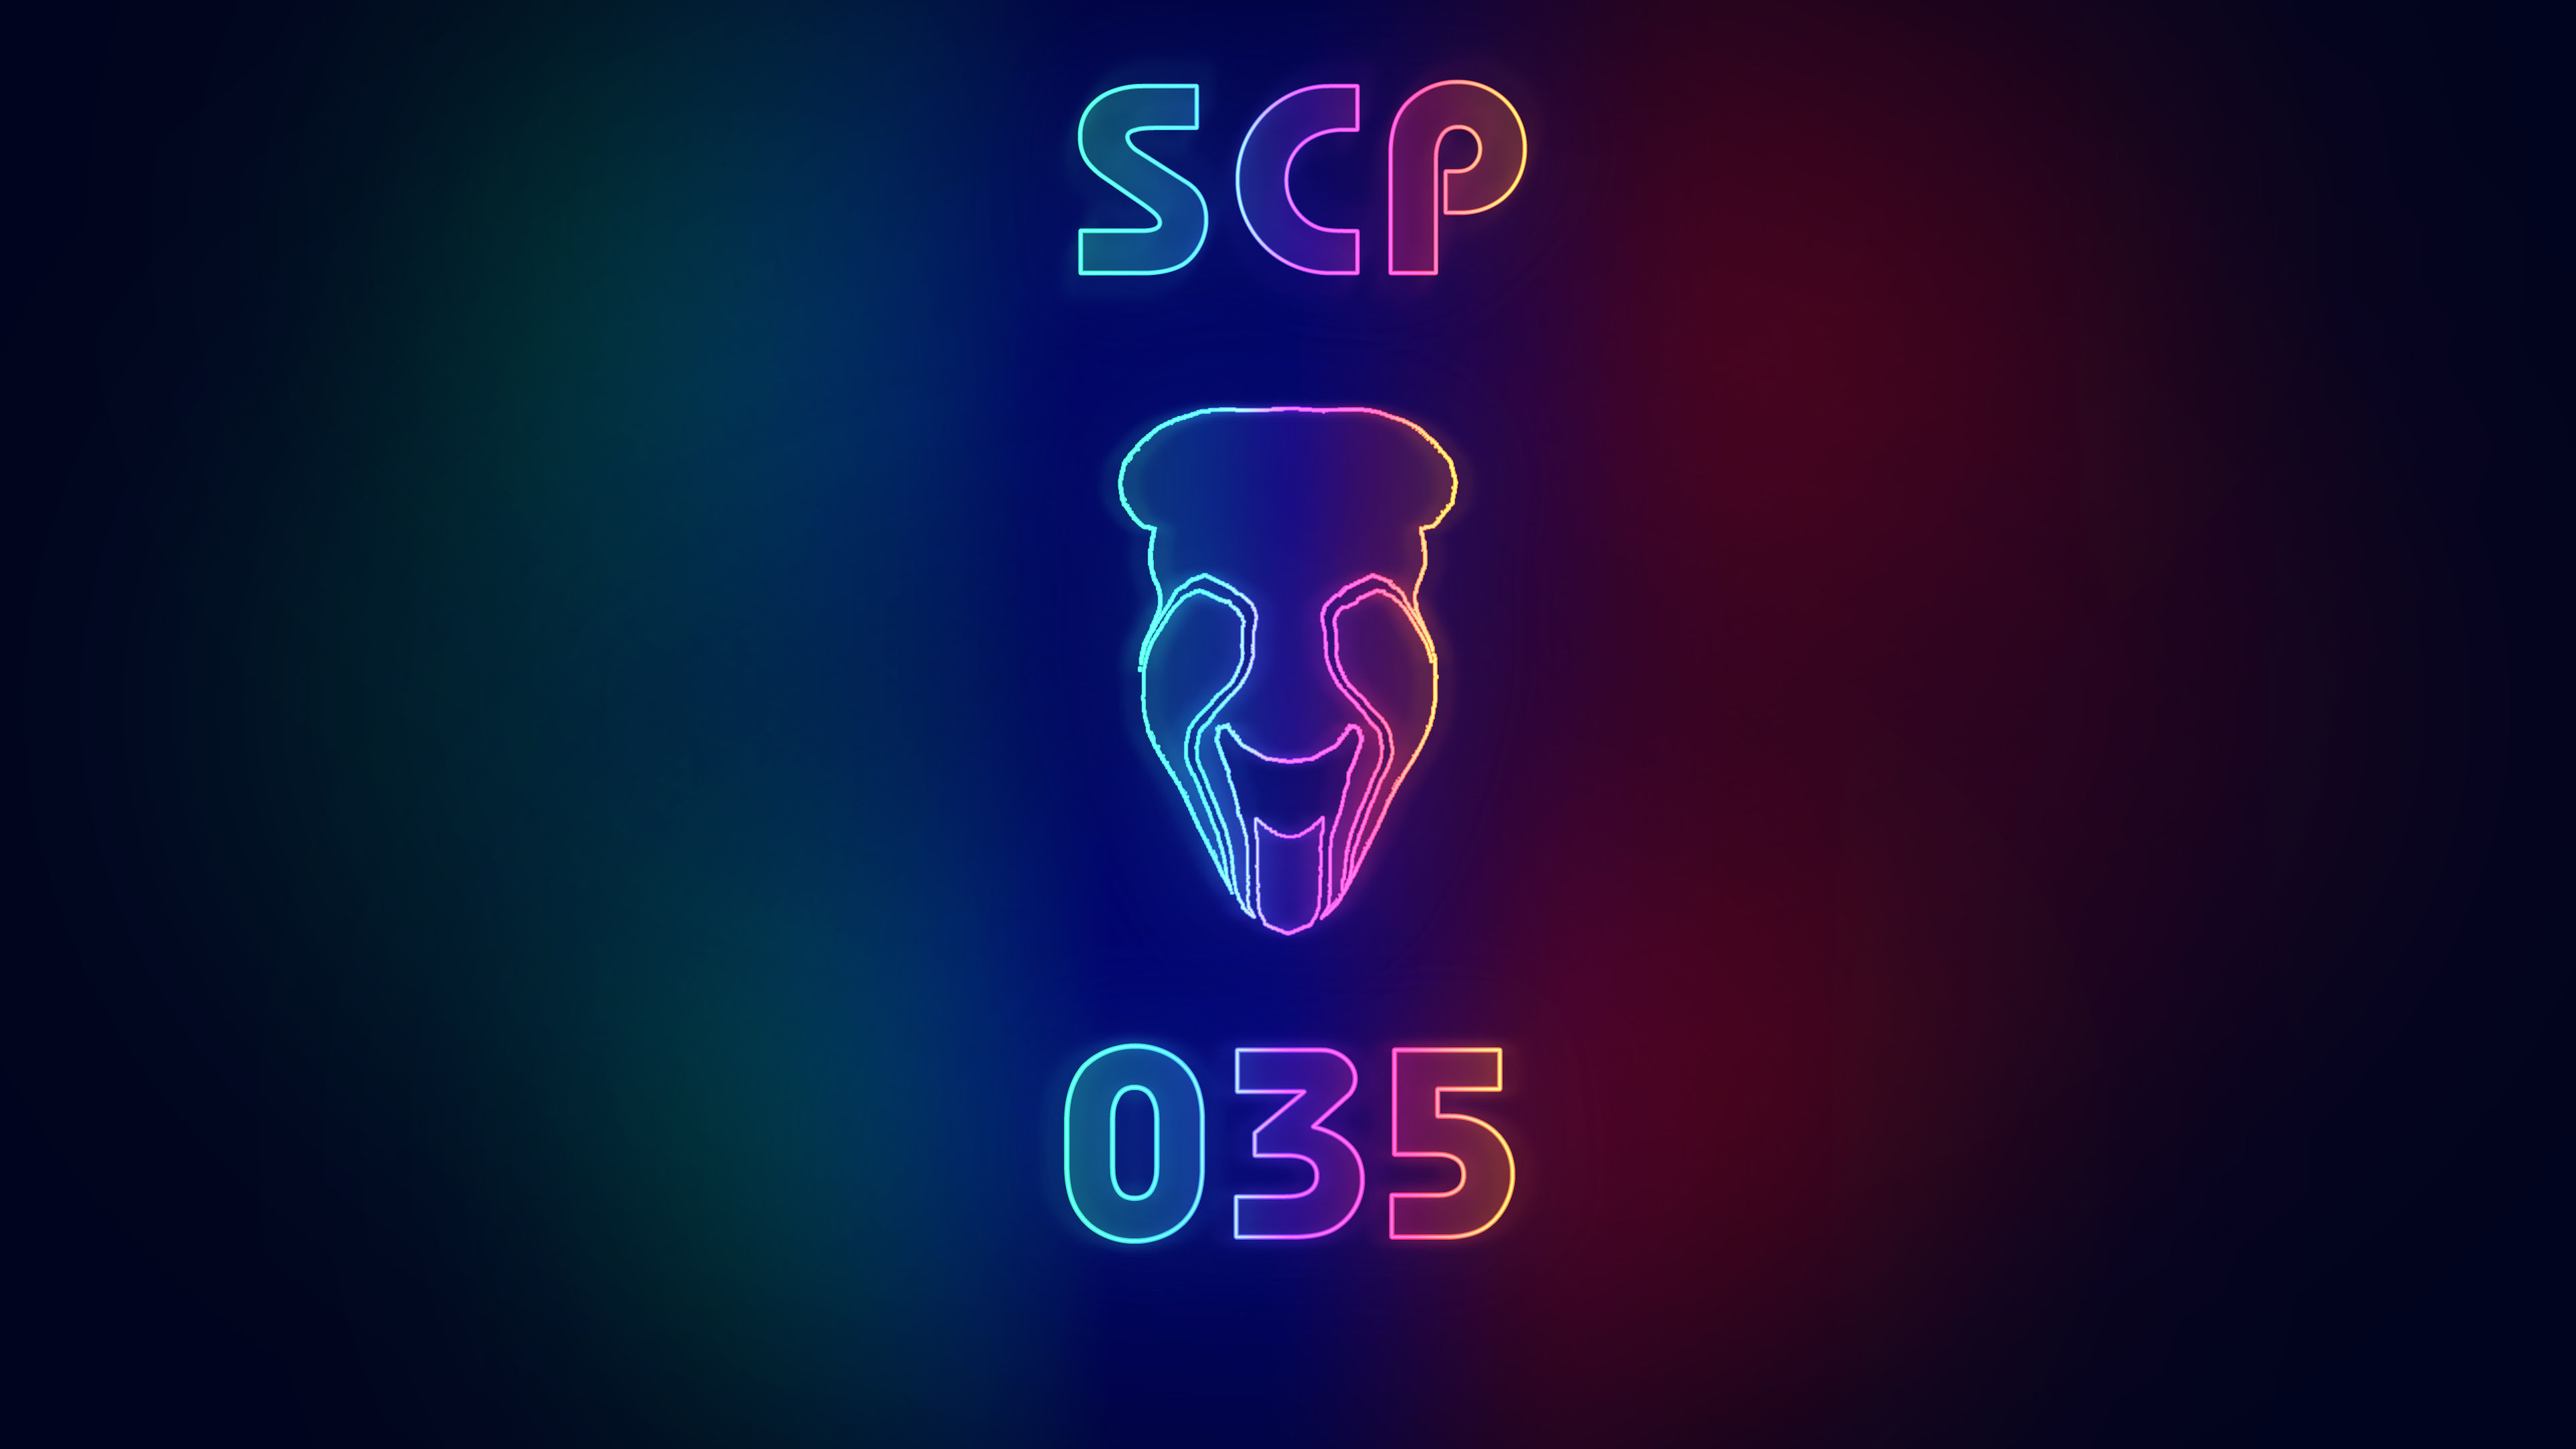 Scp Wallpapers